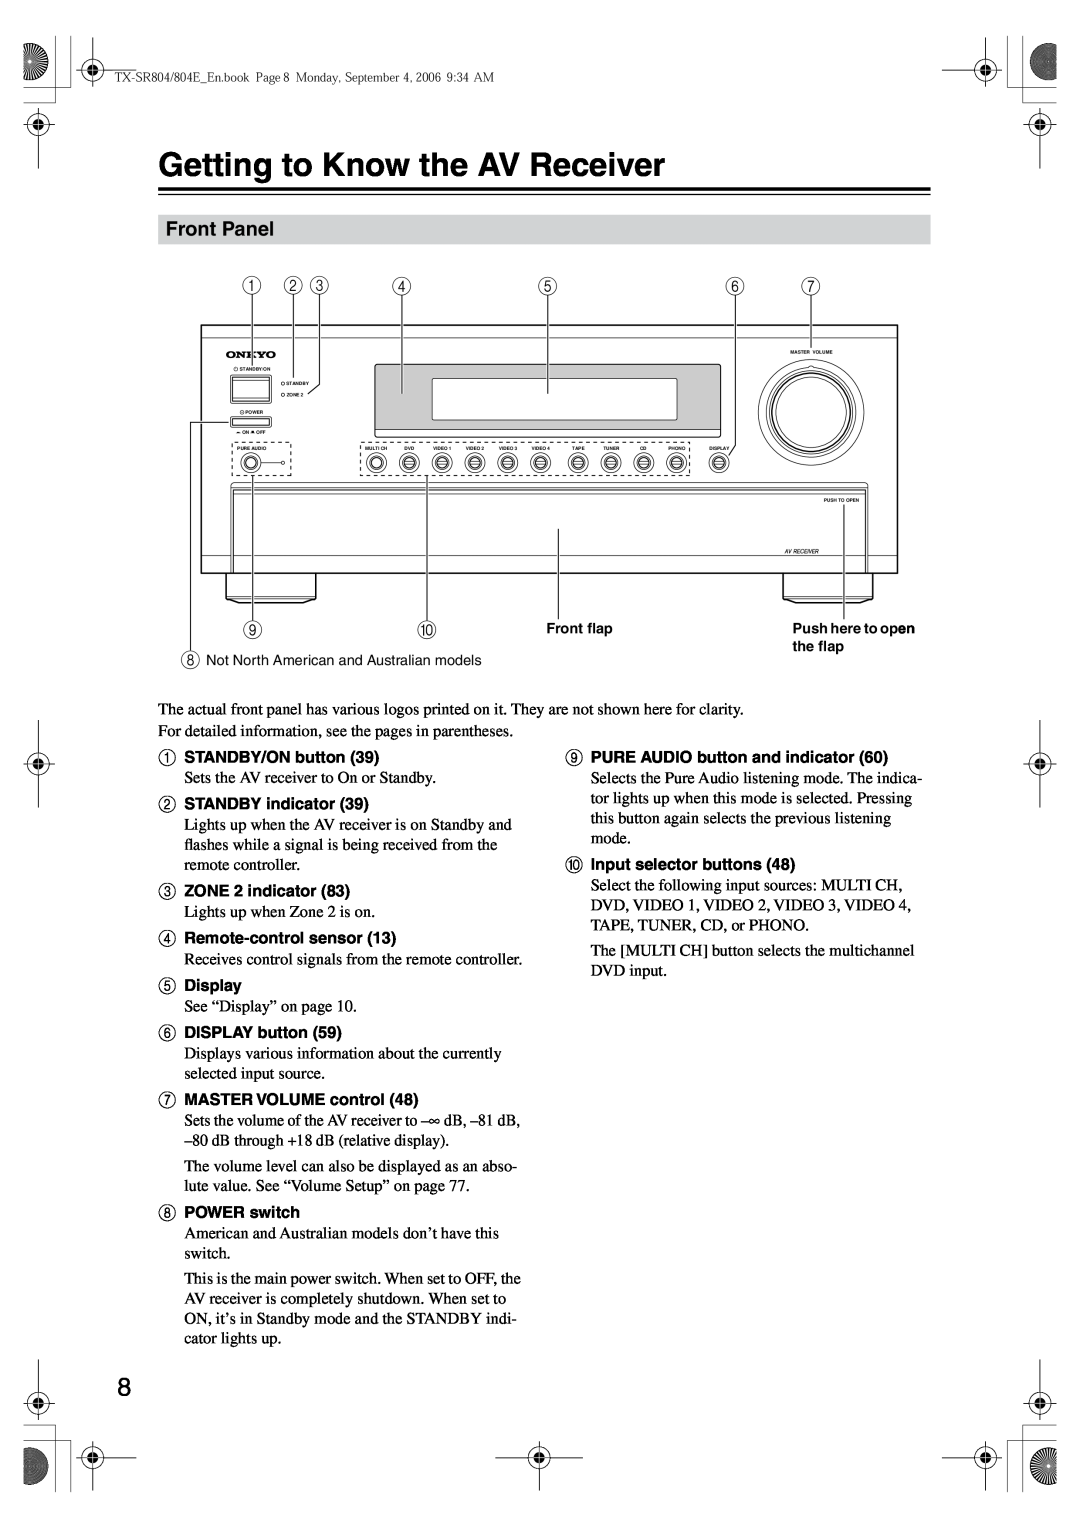 Onkyo TX-SR804E instruction manual Getting to Know the AV Receiver, Front Panel 